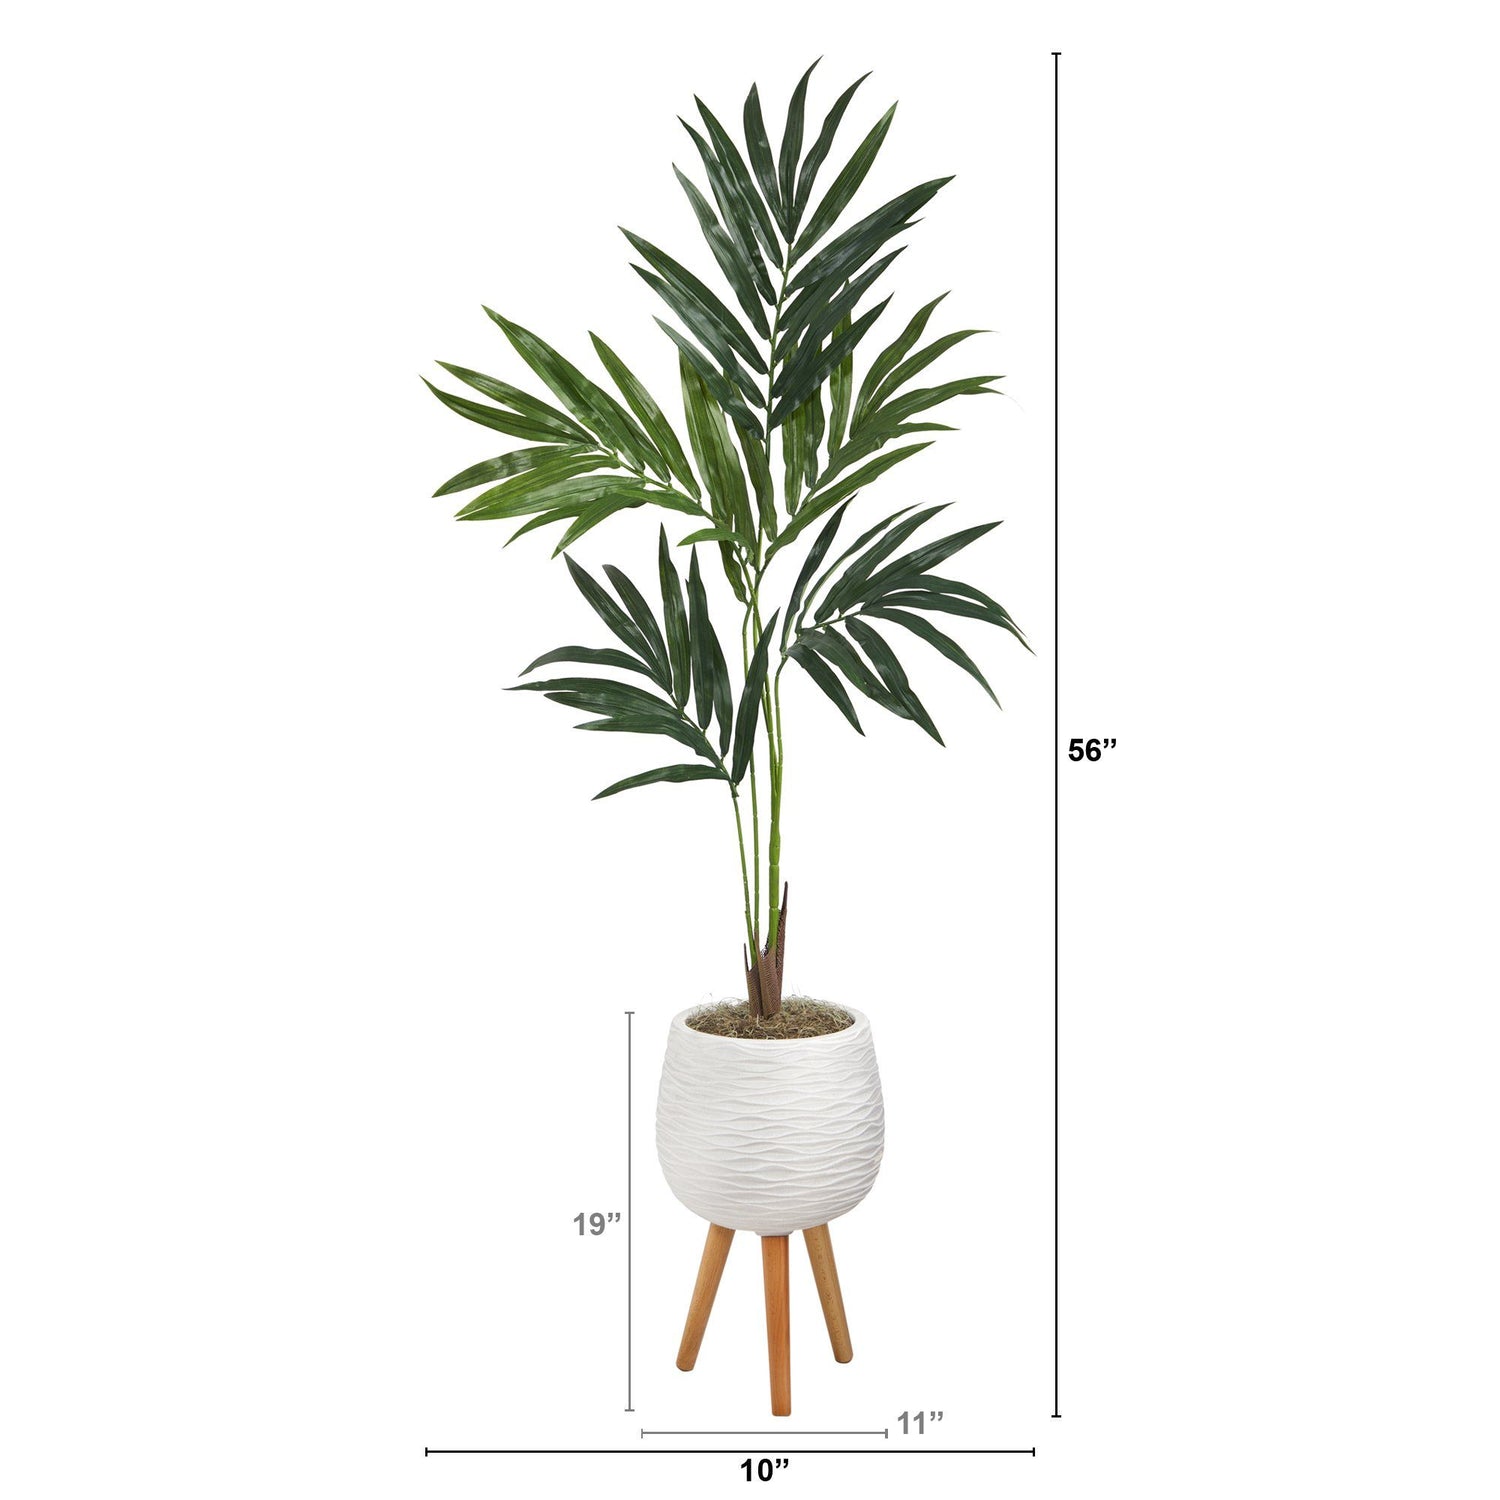 56” Kentia Artificial Palm Tree in White Planter with Stand